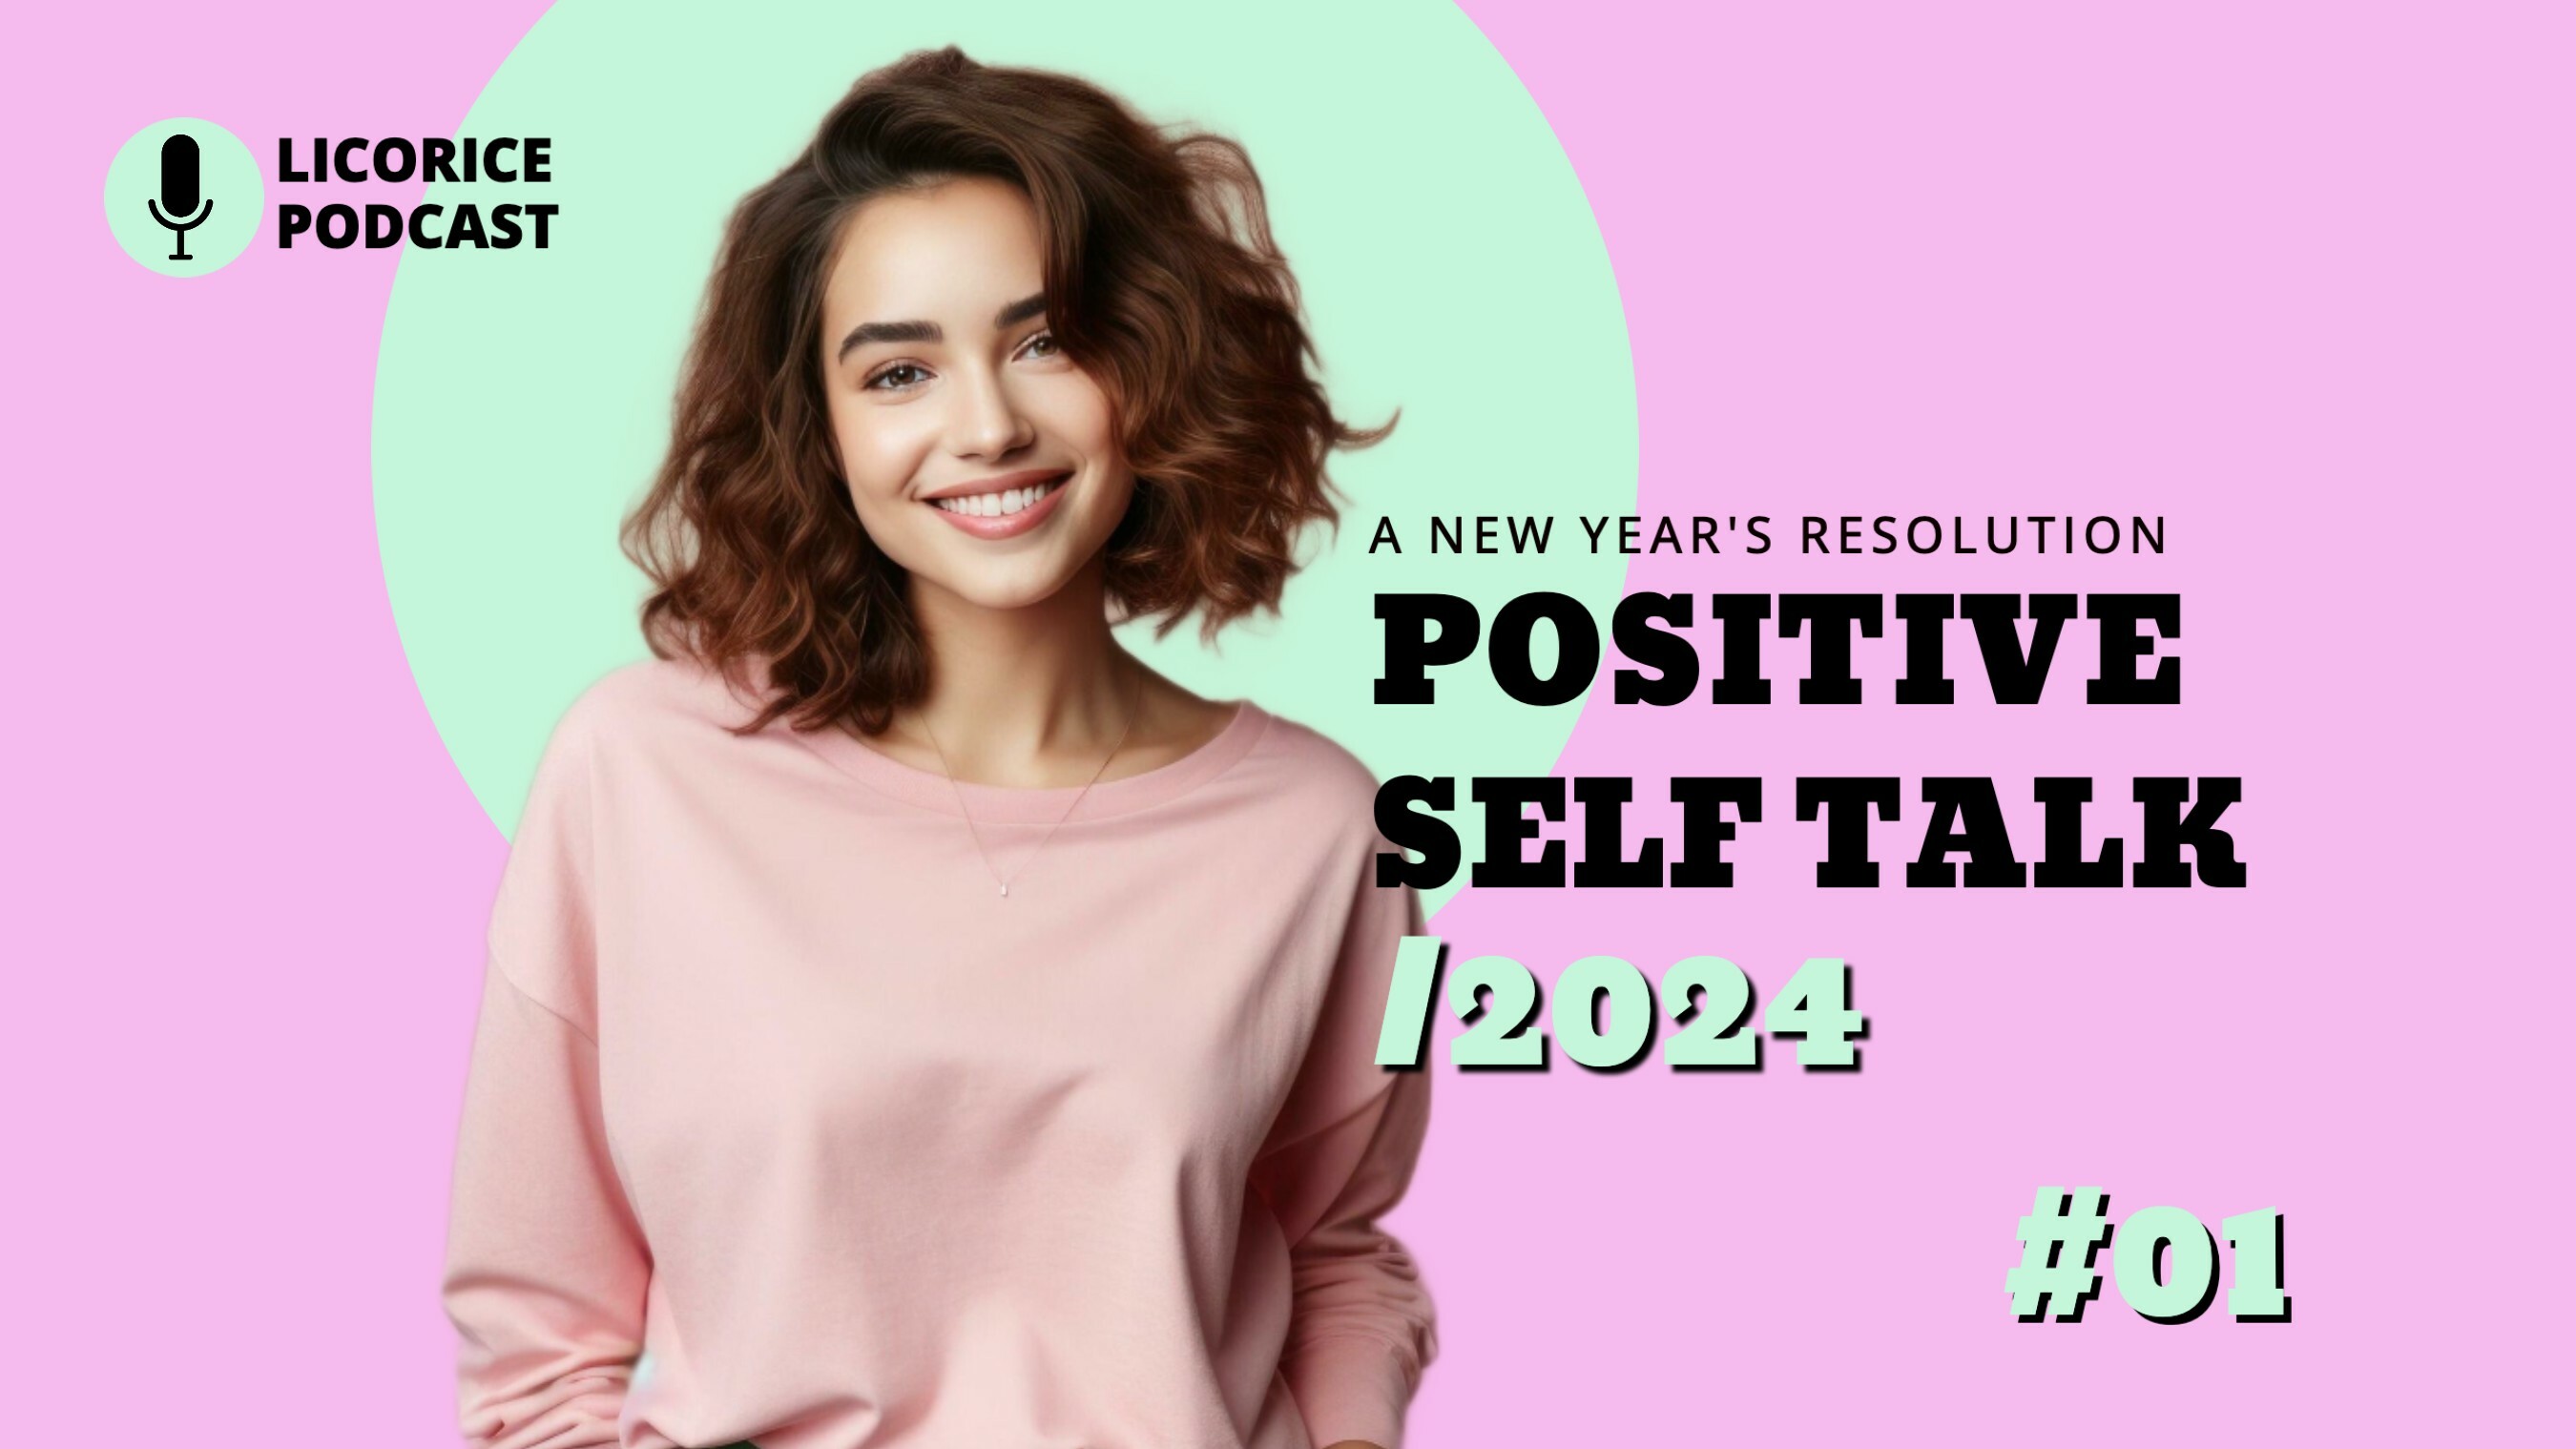 mint and pink new year youtube thumbnail social media design idea template